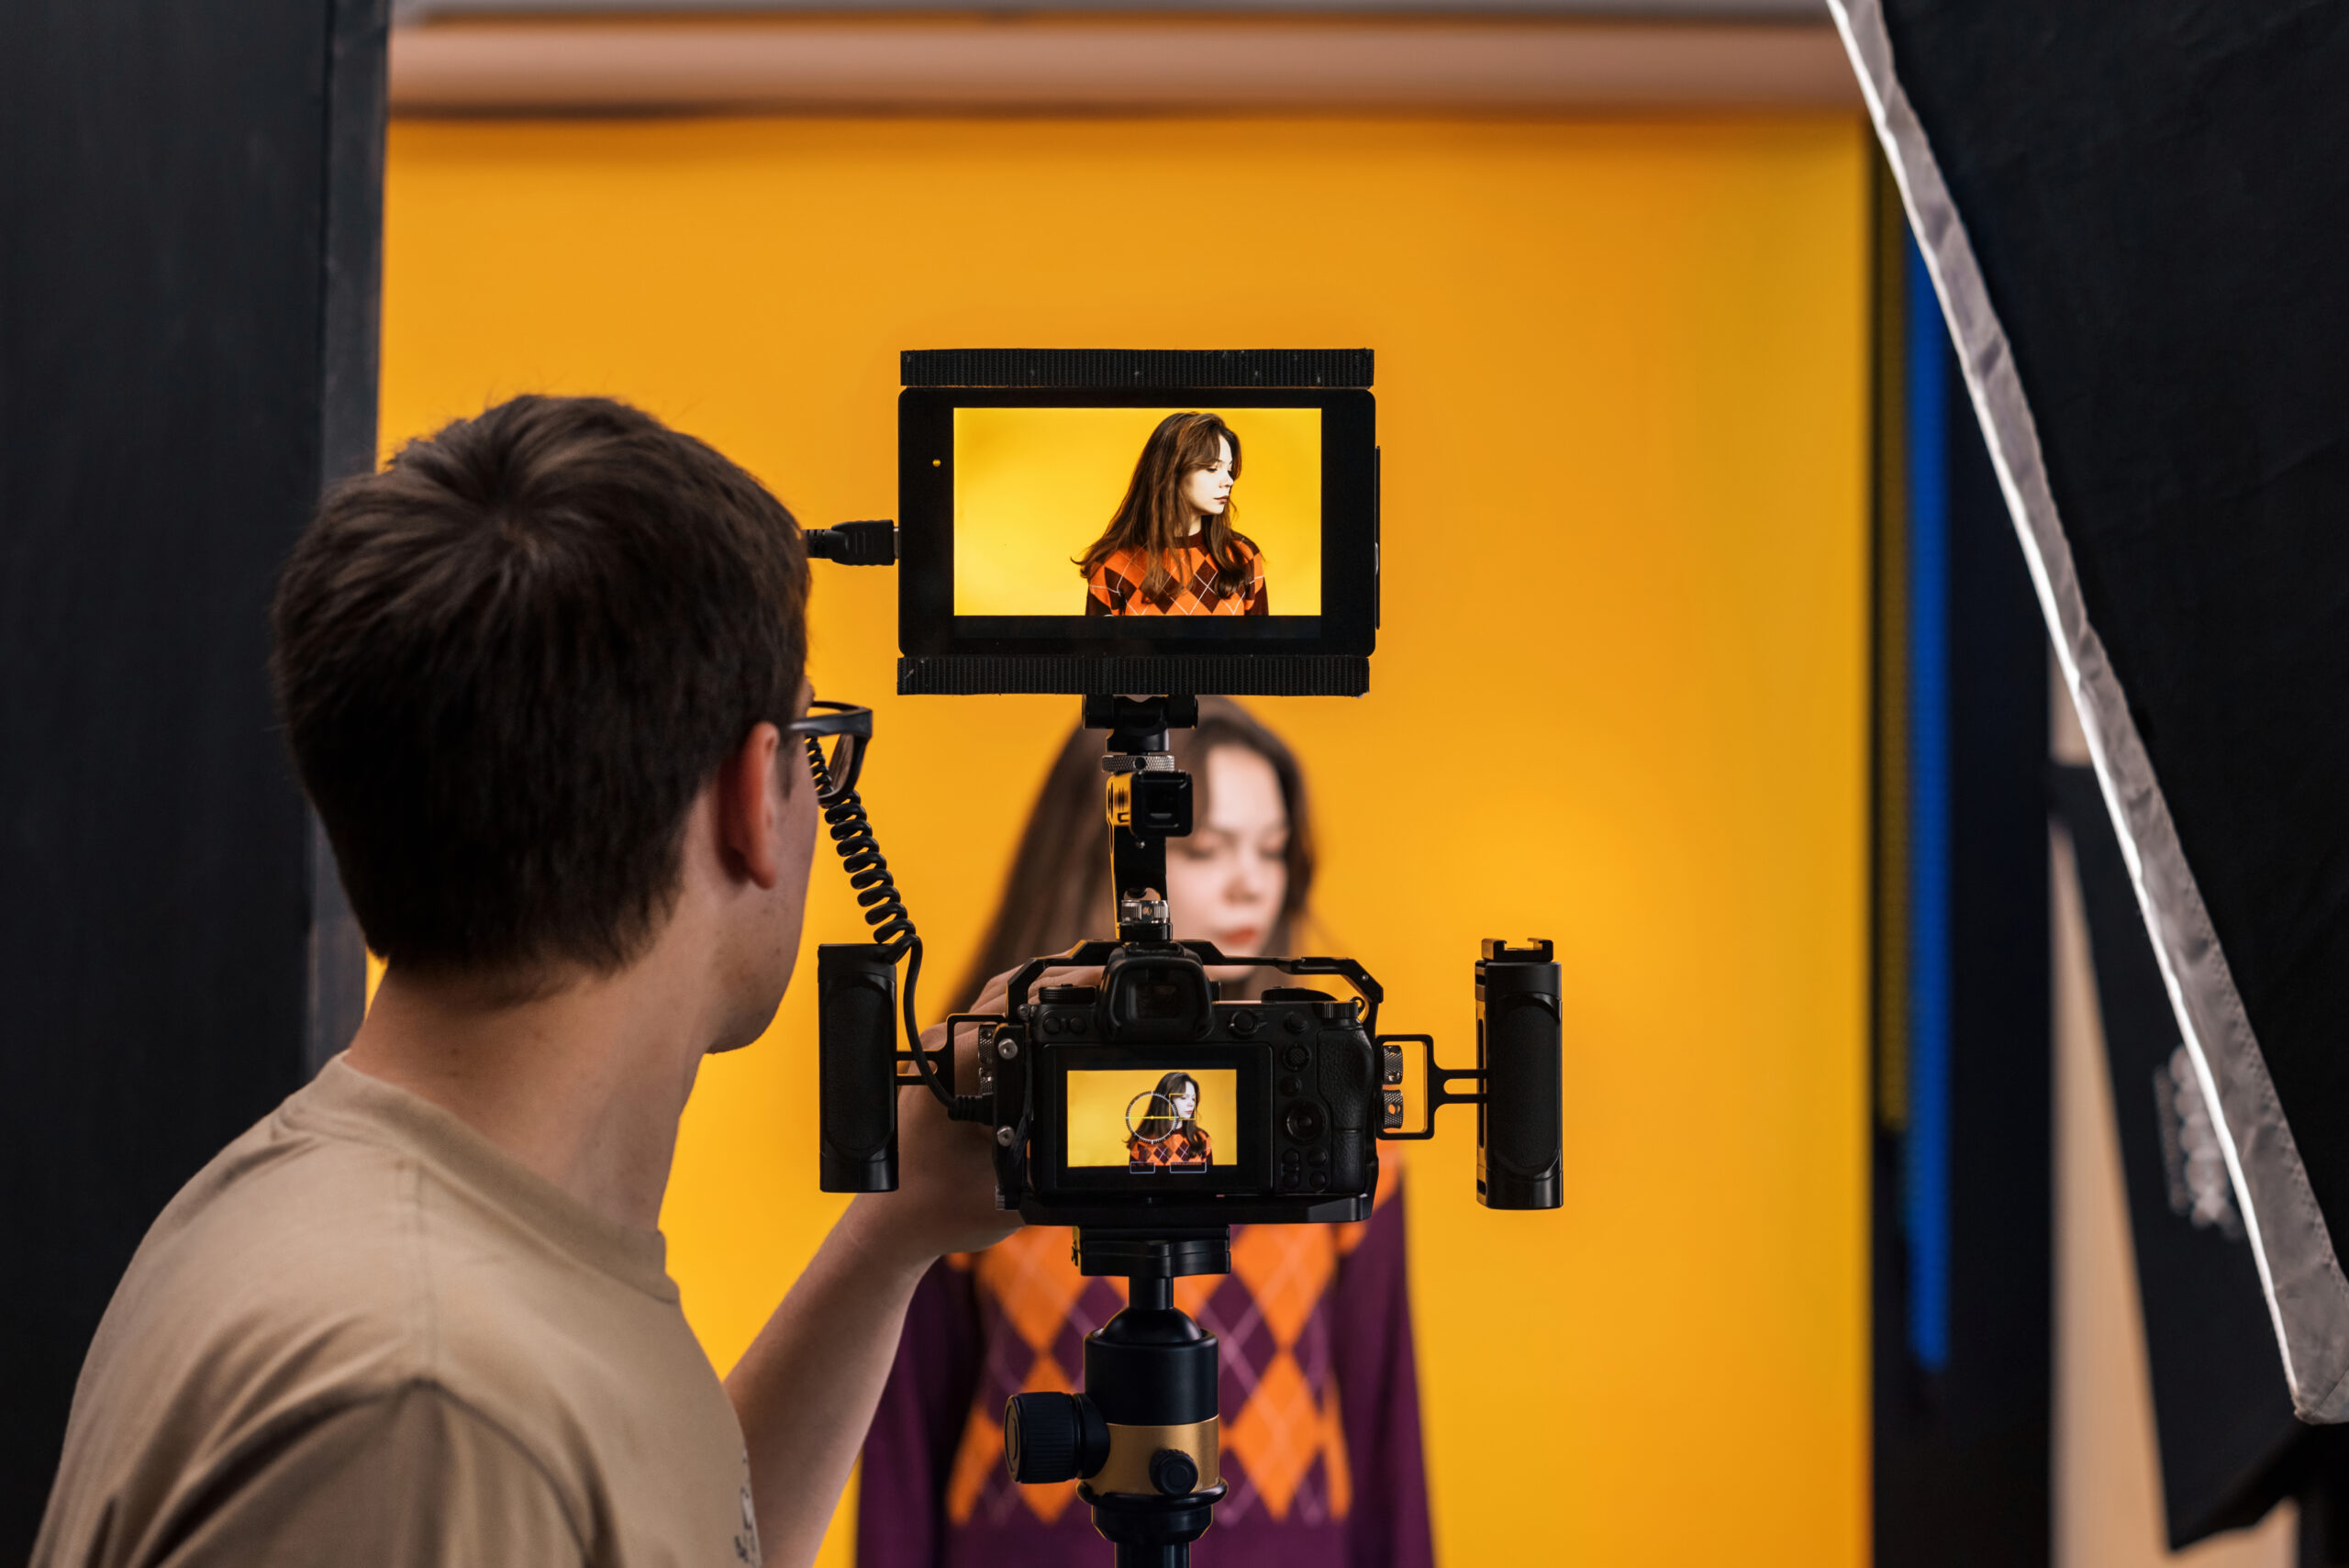 View of a professional photographer shooting a young woman using a camera with external display, yellow background